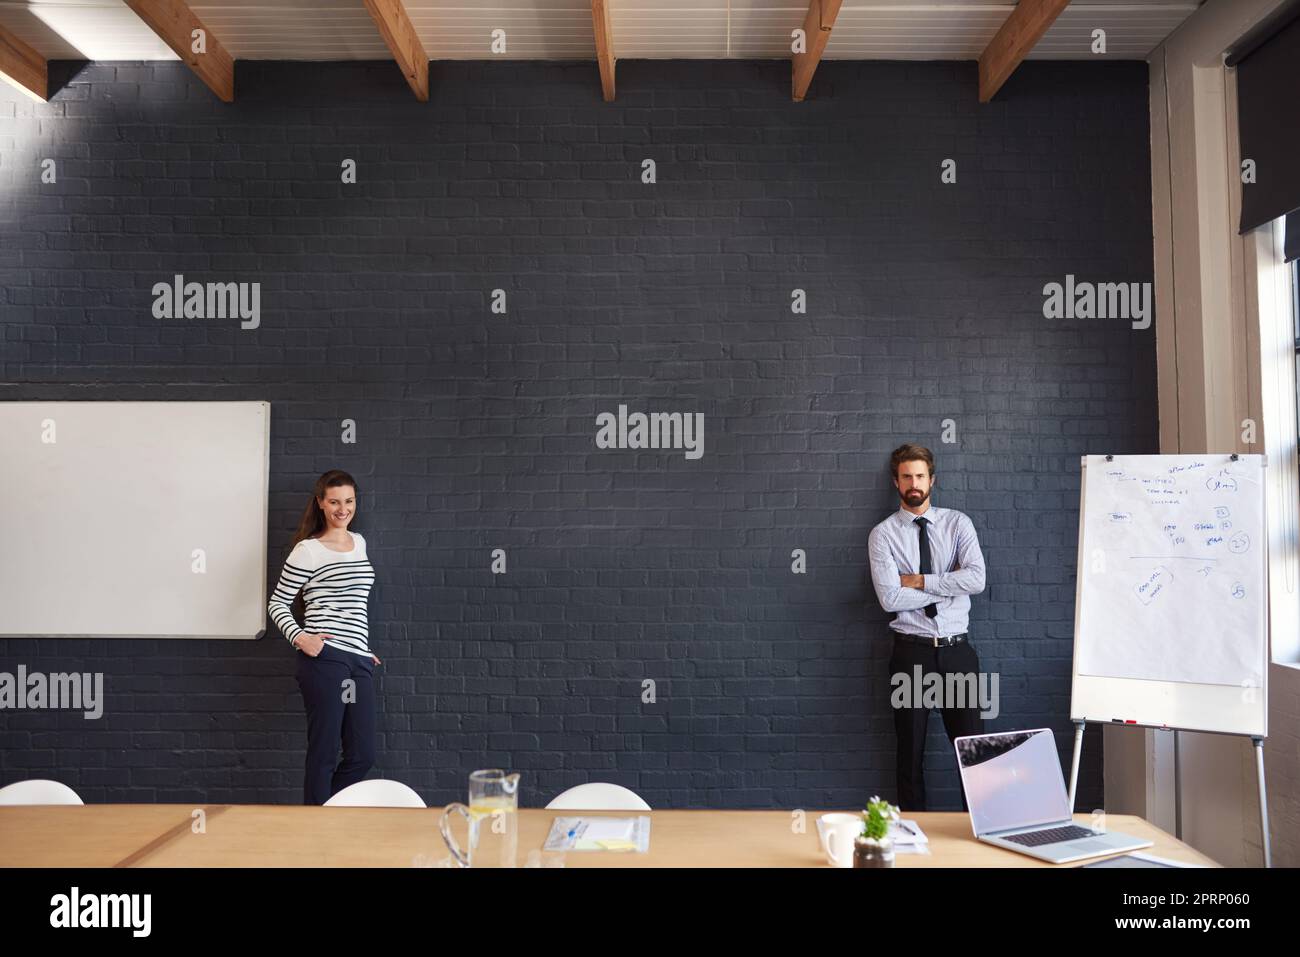 The perfect pair to present your product. Portrait of two young businesspeople standing in the boardroom. Stock Photo